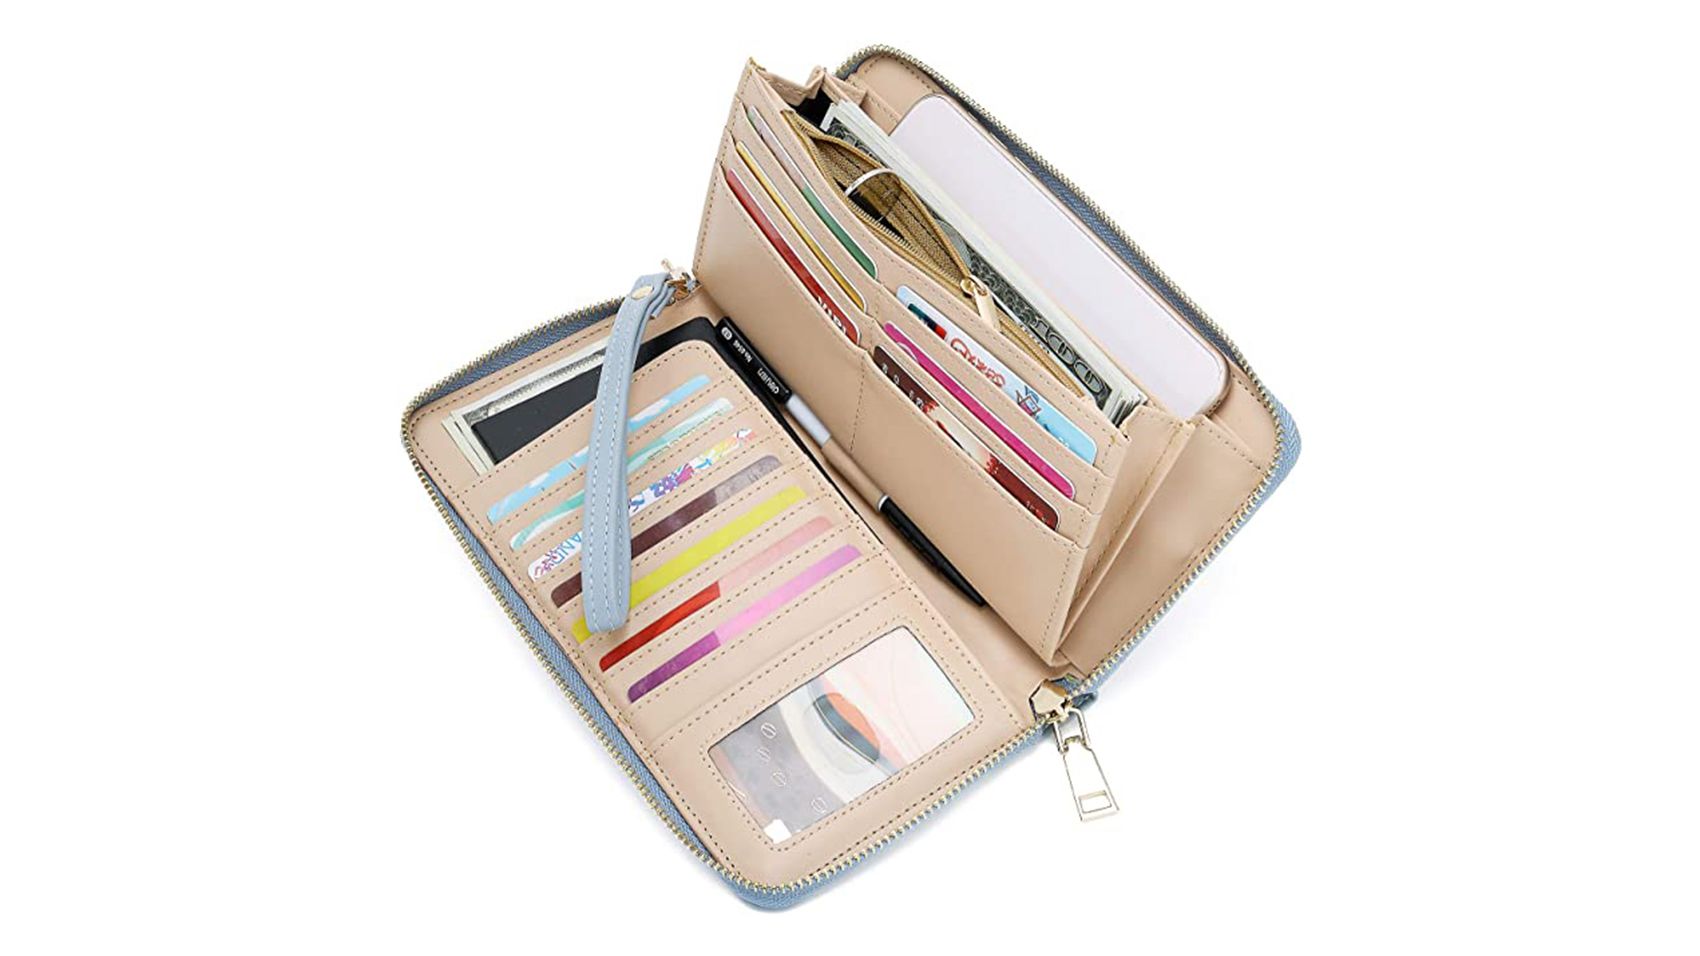  Bella Taylor Slim Card Wallet for Women, Multi Card Zip Around  Wallet with RFID Protection